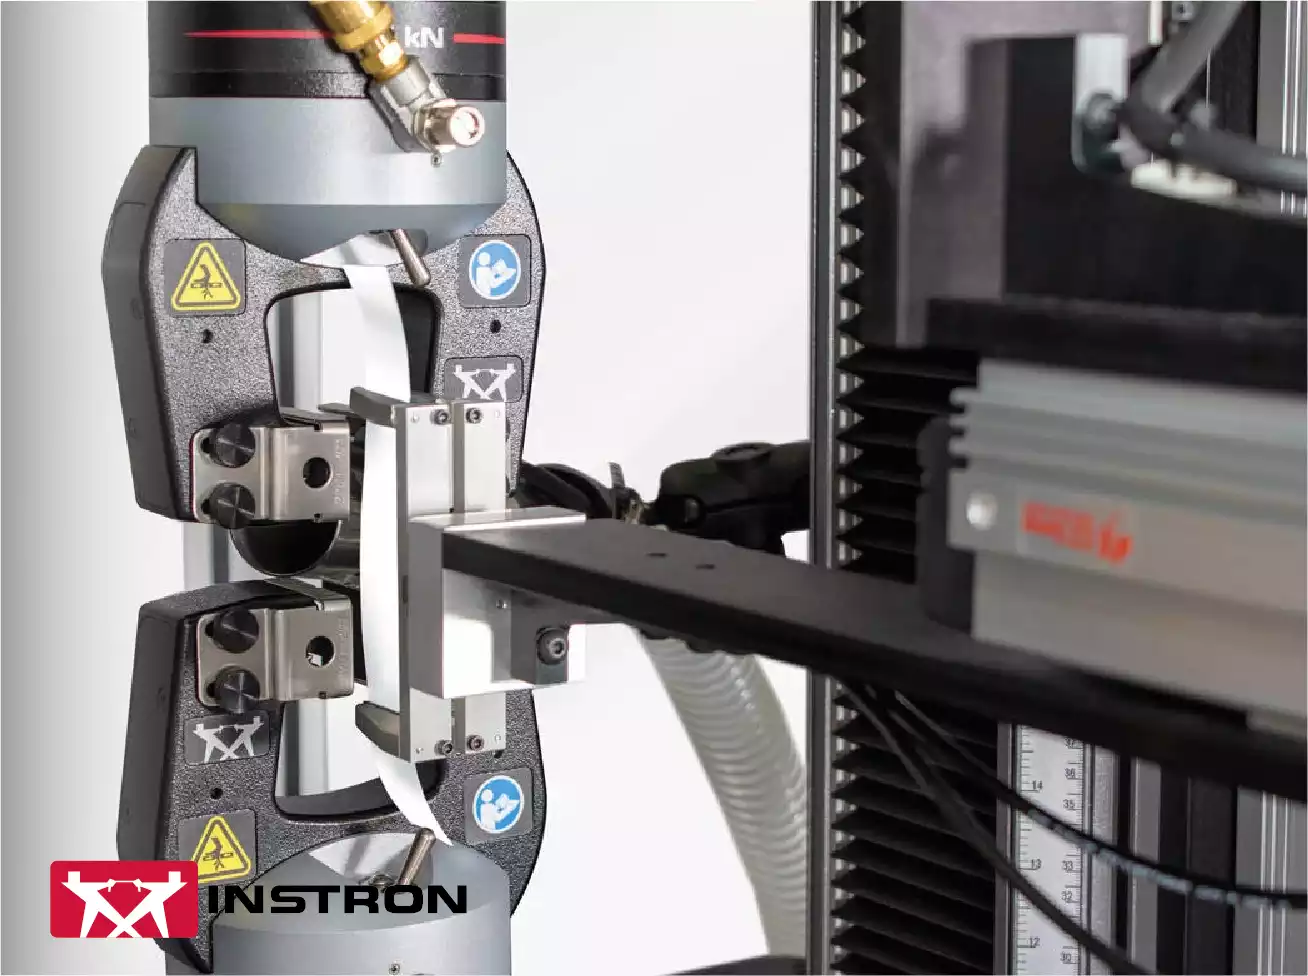 Instron AT3 3-Axis Non-Robotic Automated Testing System